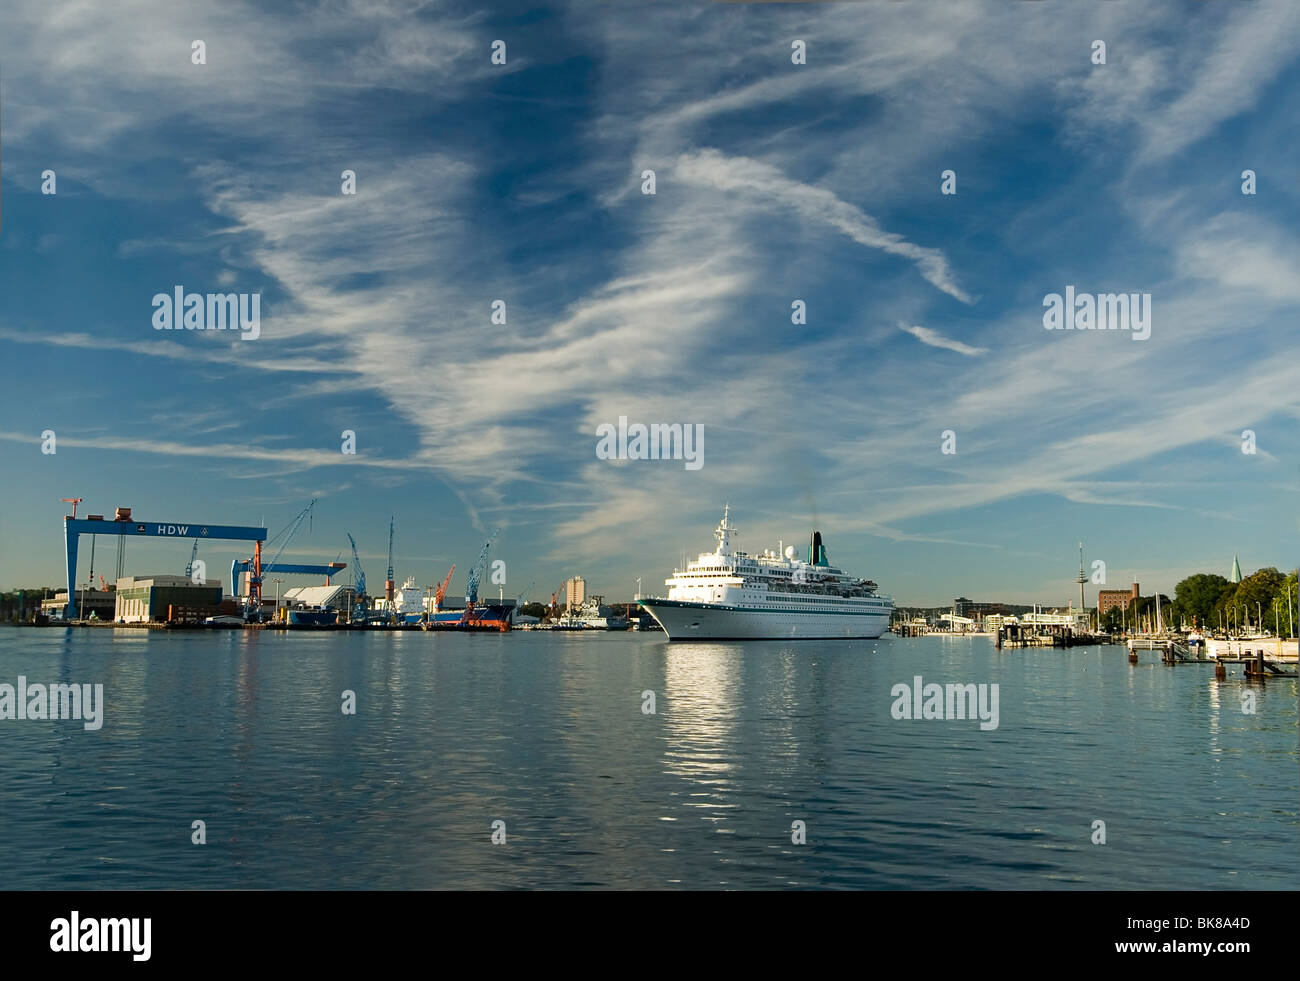 Inner fjord of Kiel with a cruise ship and the HDW shipyard, state capital of Kiel, Schleswig-Holstein, Germany, Europe Stock Photo